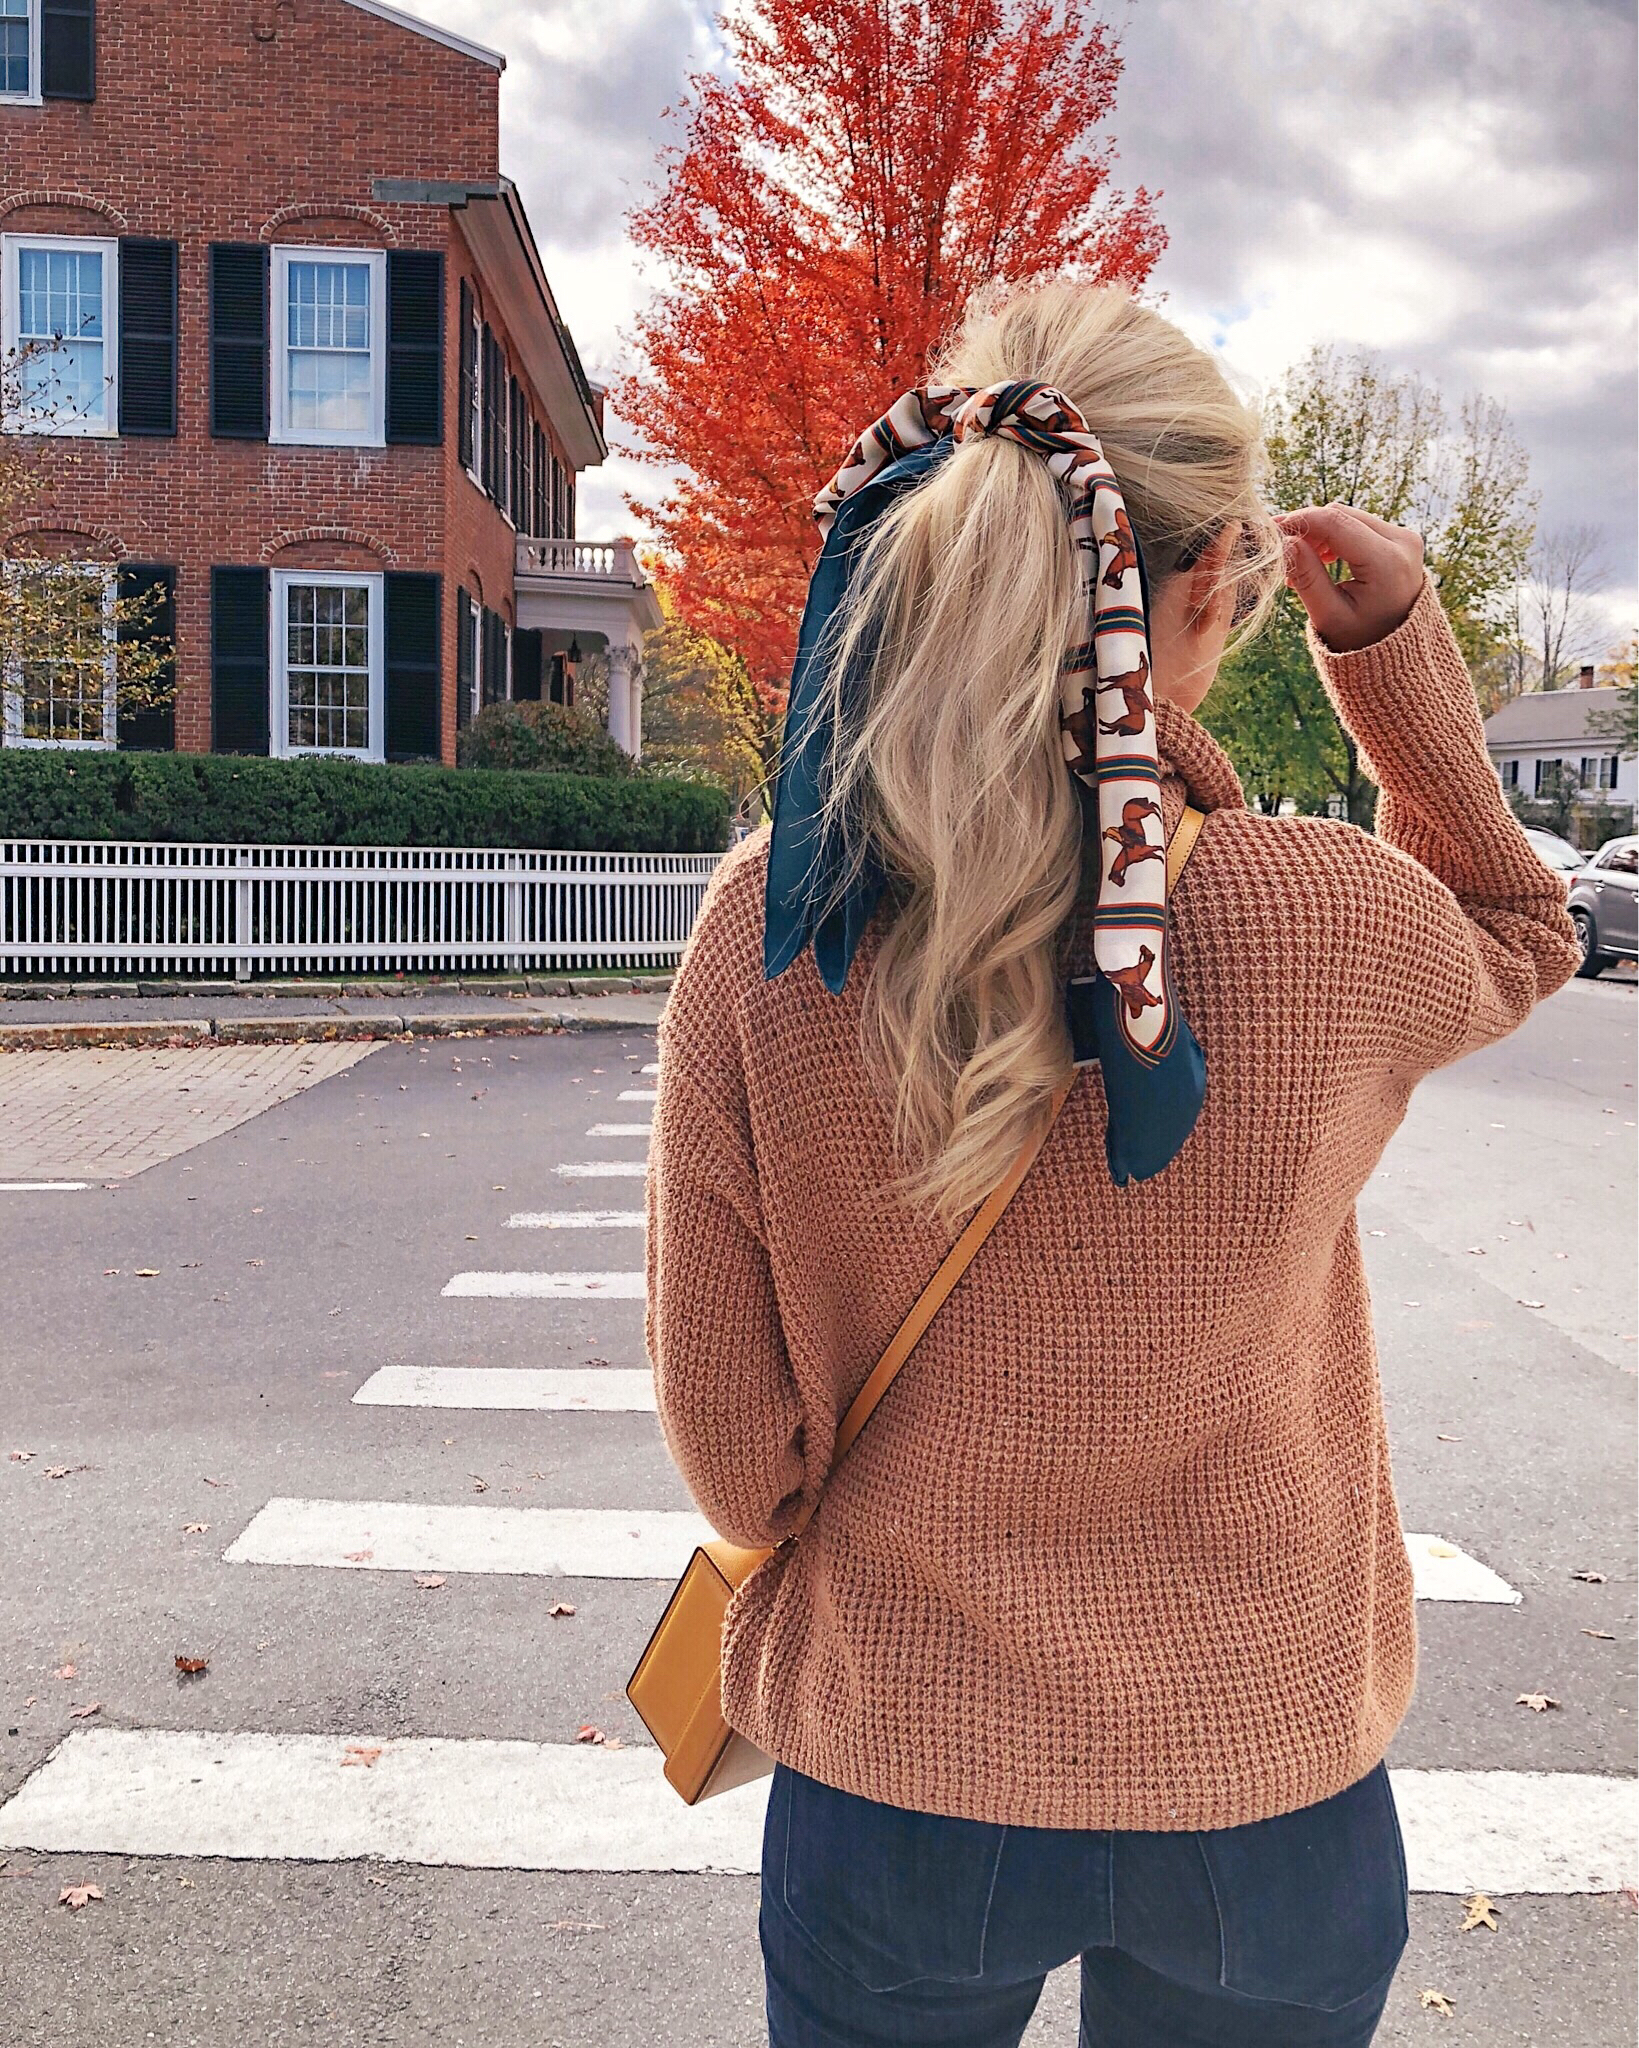 Fall-fashion-hair-accessories-lo-murphy-fall-outfit-inspiration